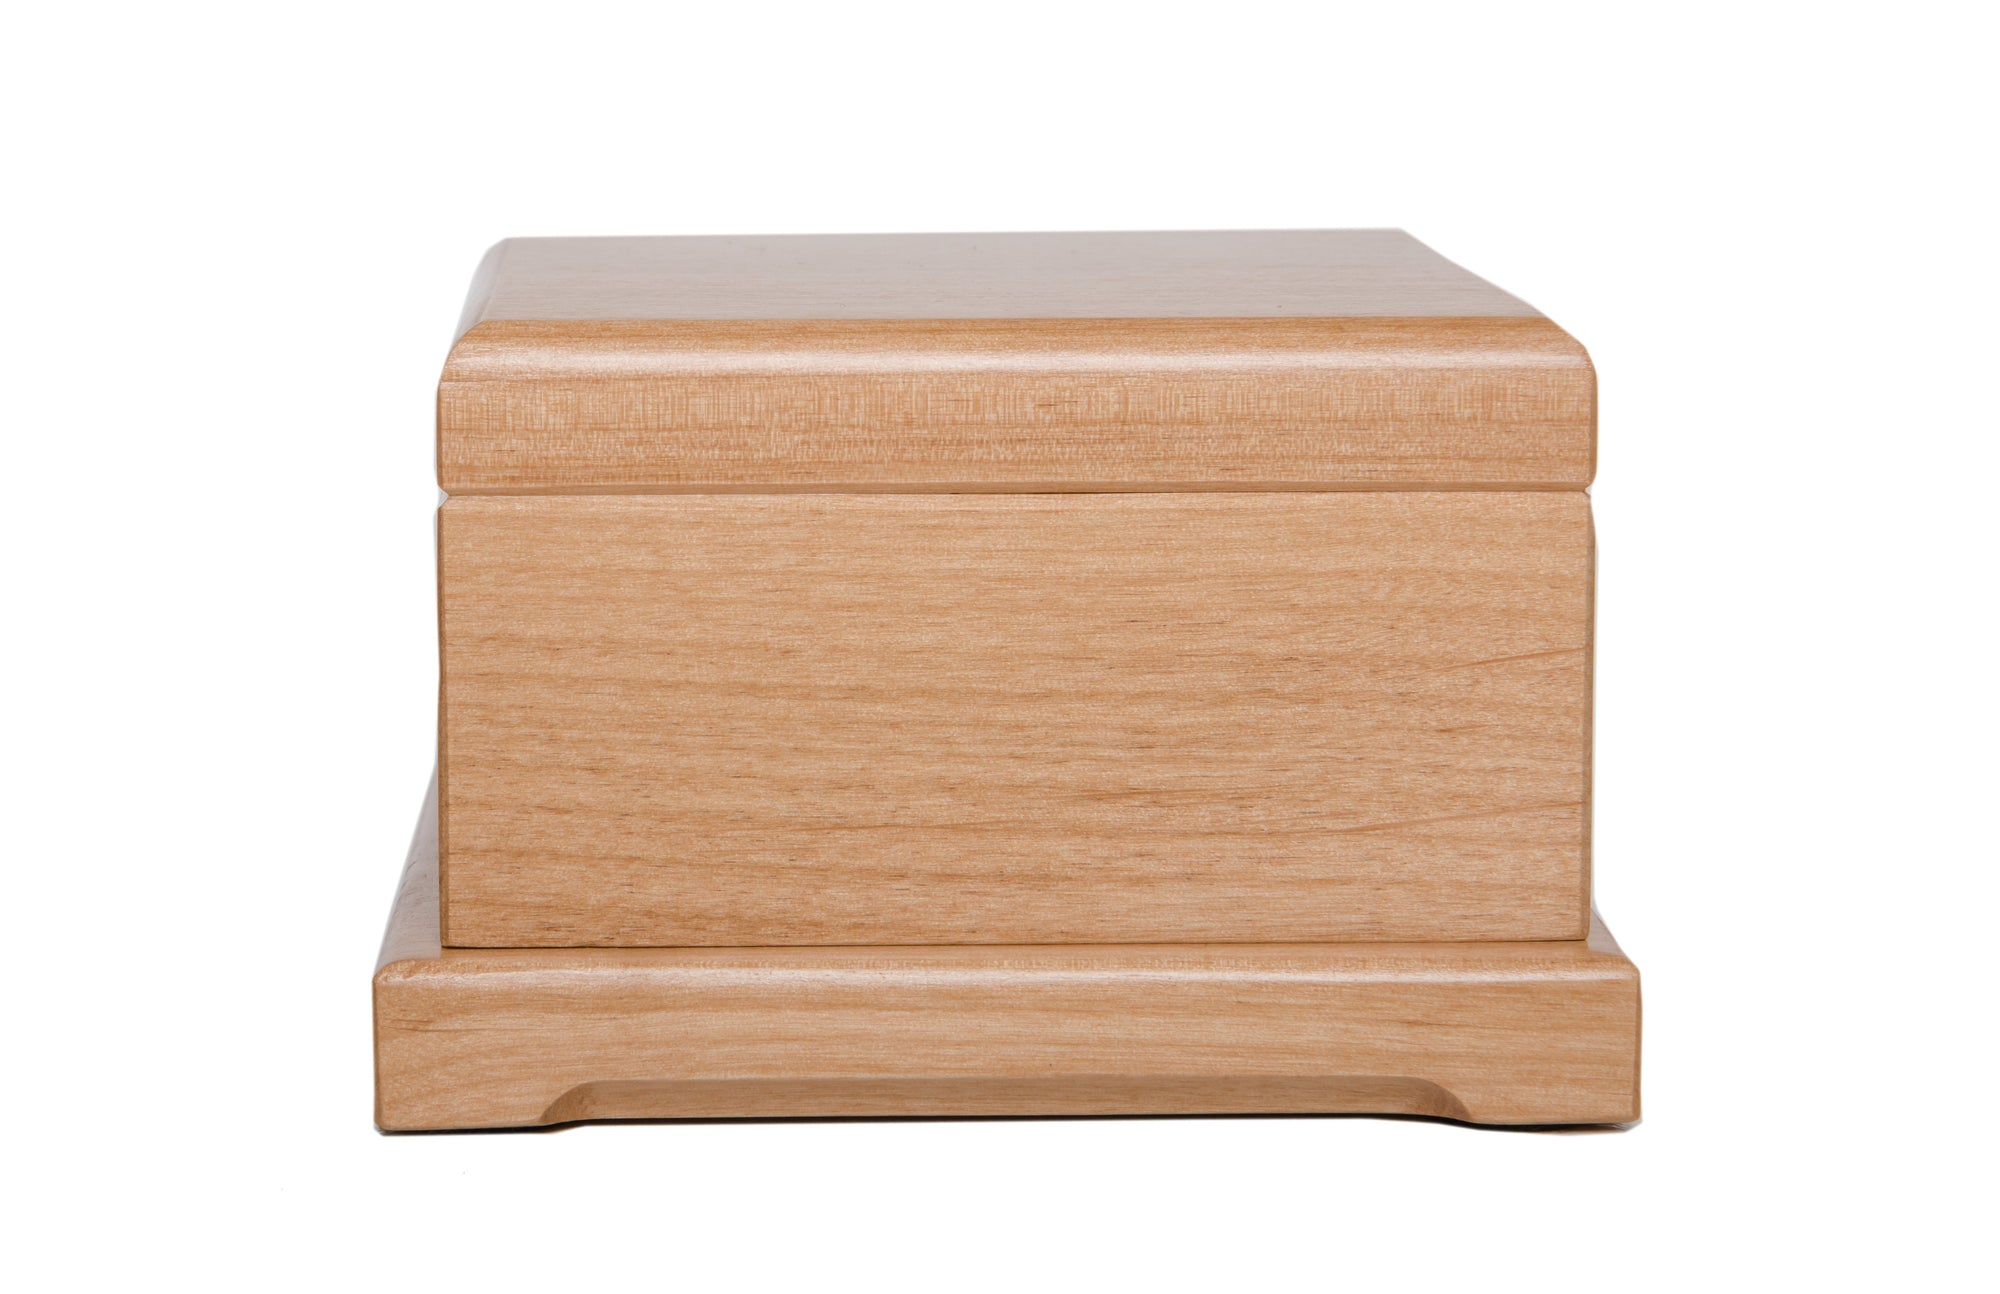 Pet Memorial Keepsake Urn Box for Dog or Cat - Loved and Remembered